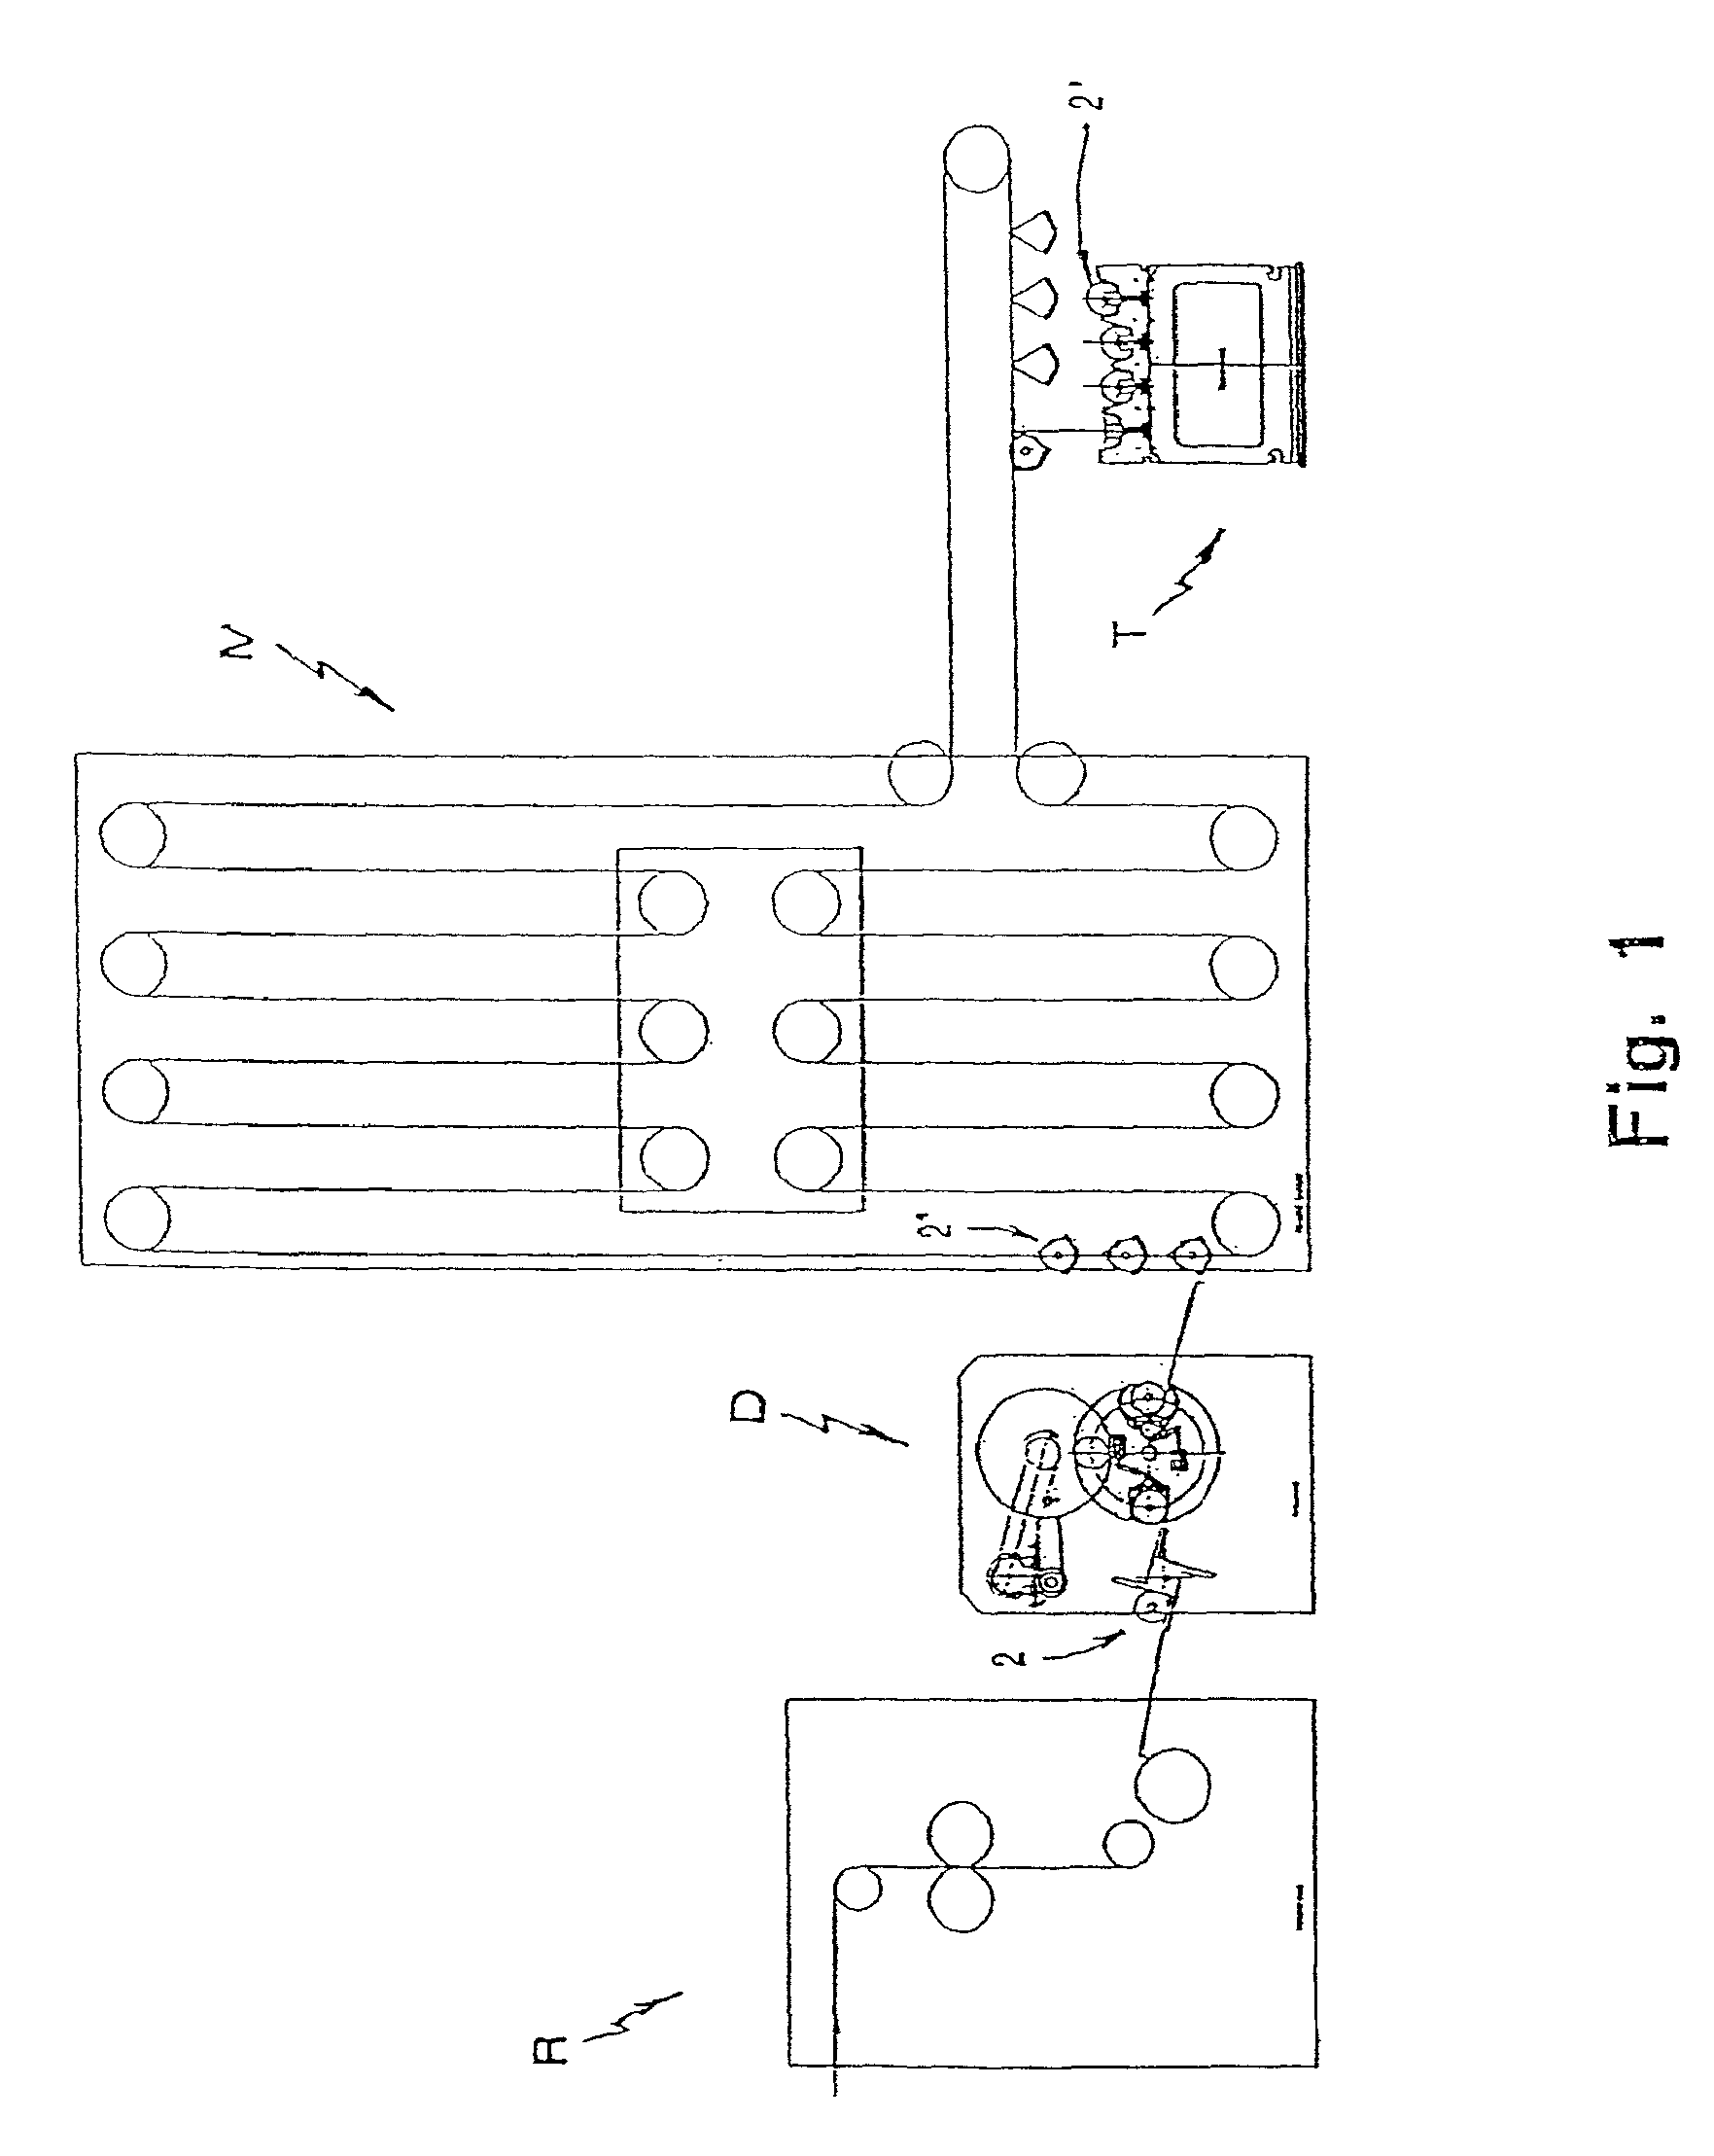 Apparatus for trimming paper rolls or logs and method for treating the logs